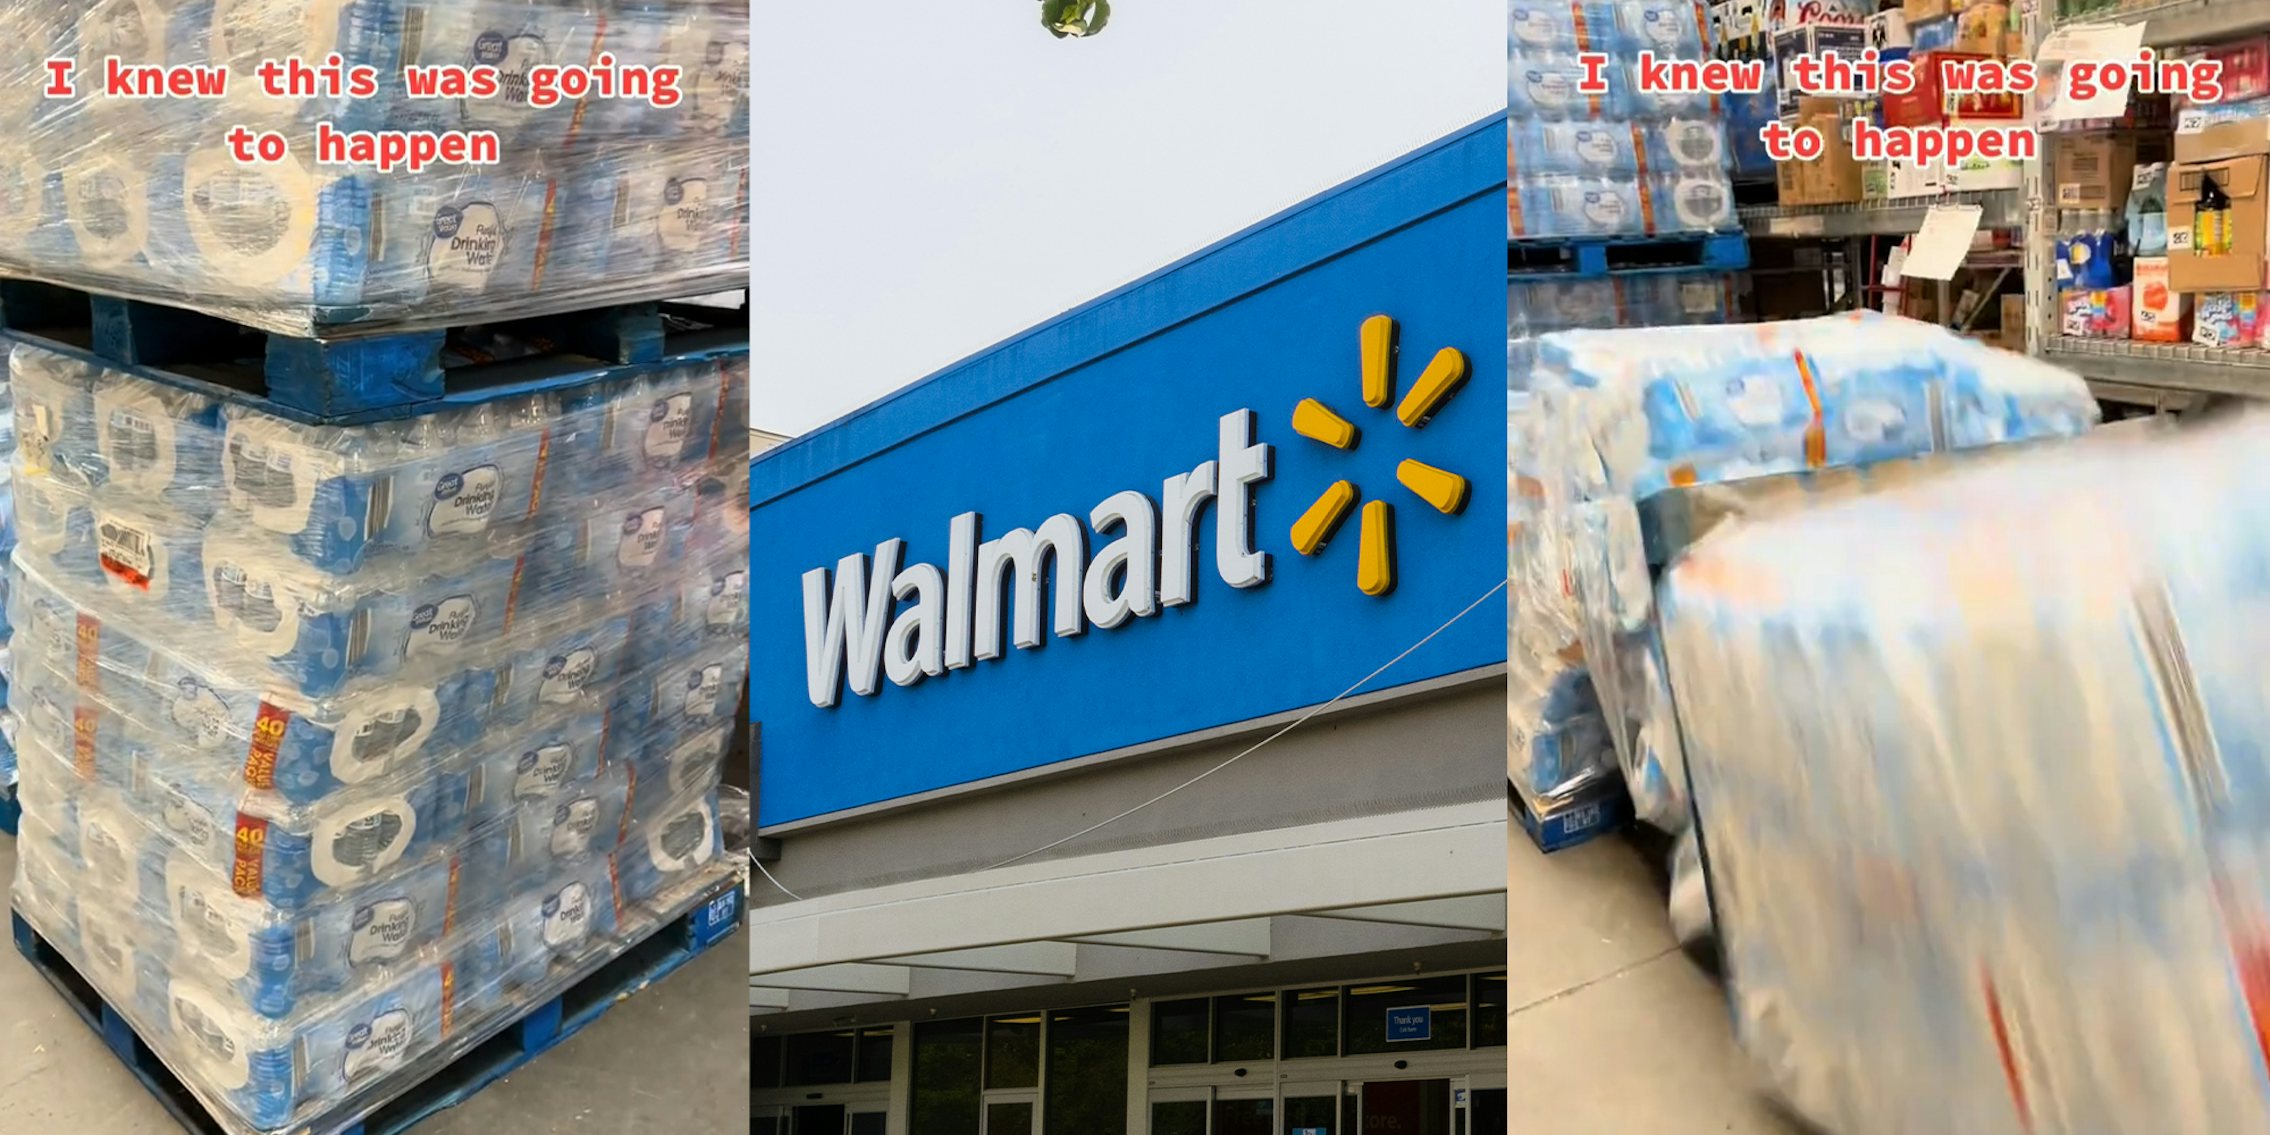 Walmart palette of Great Value drinking water gets stacked too high and comes crashing down